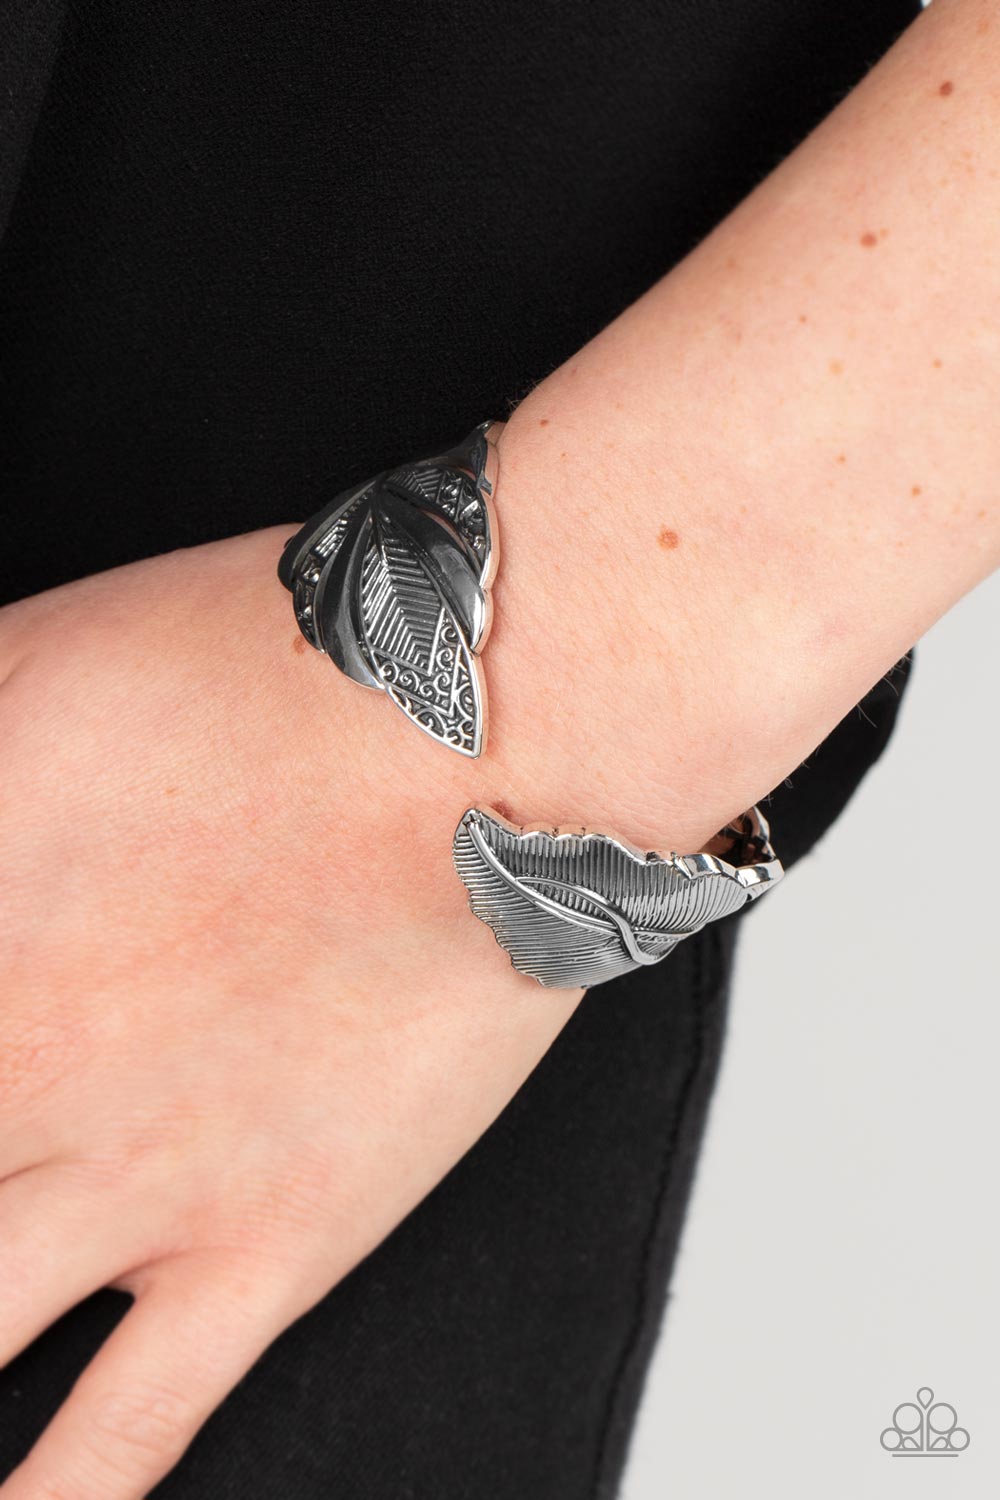 American Art Silver Feather Bracelet - Paparazzi Accessories-on model - CarasShop.com - $5 Jewelry by Cara Jewels